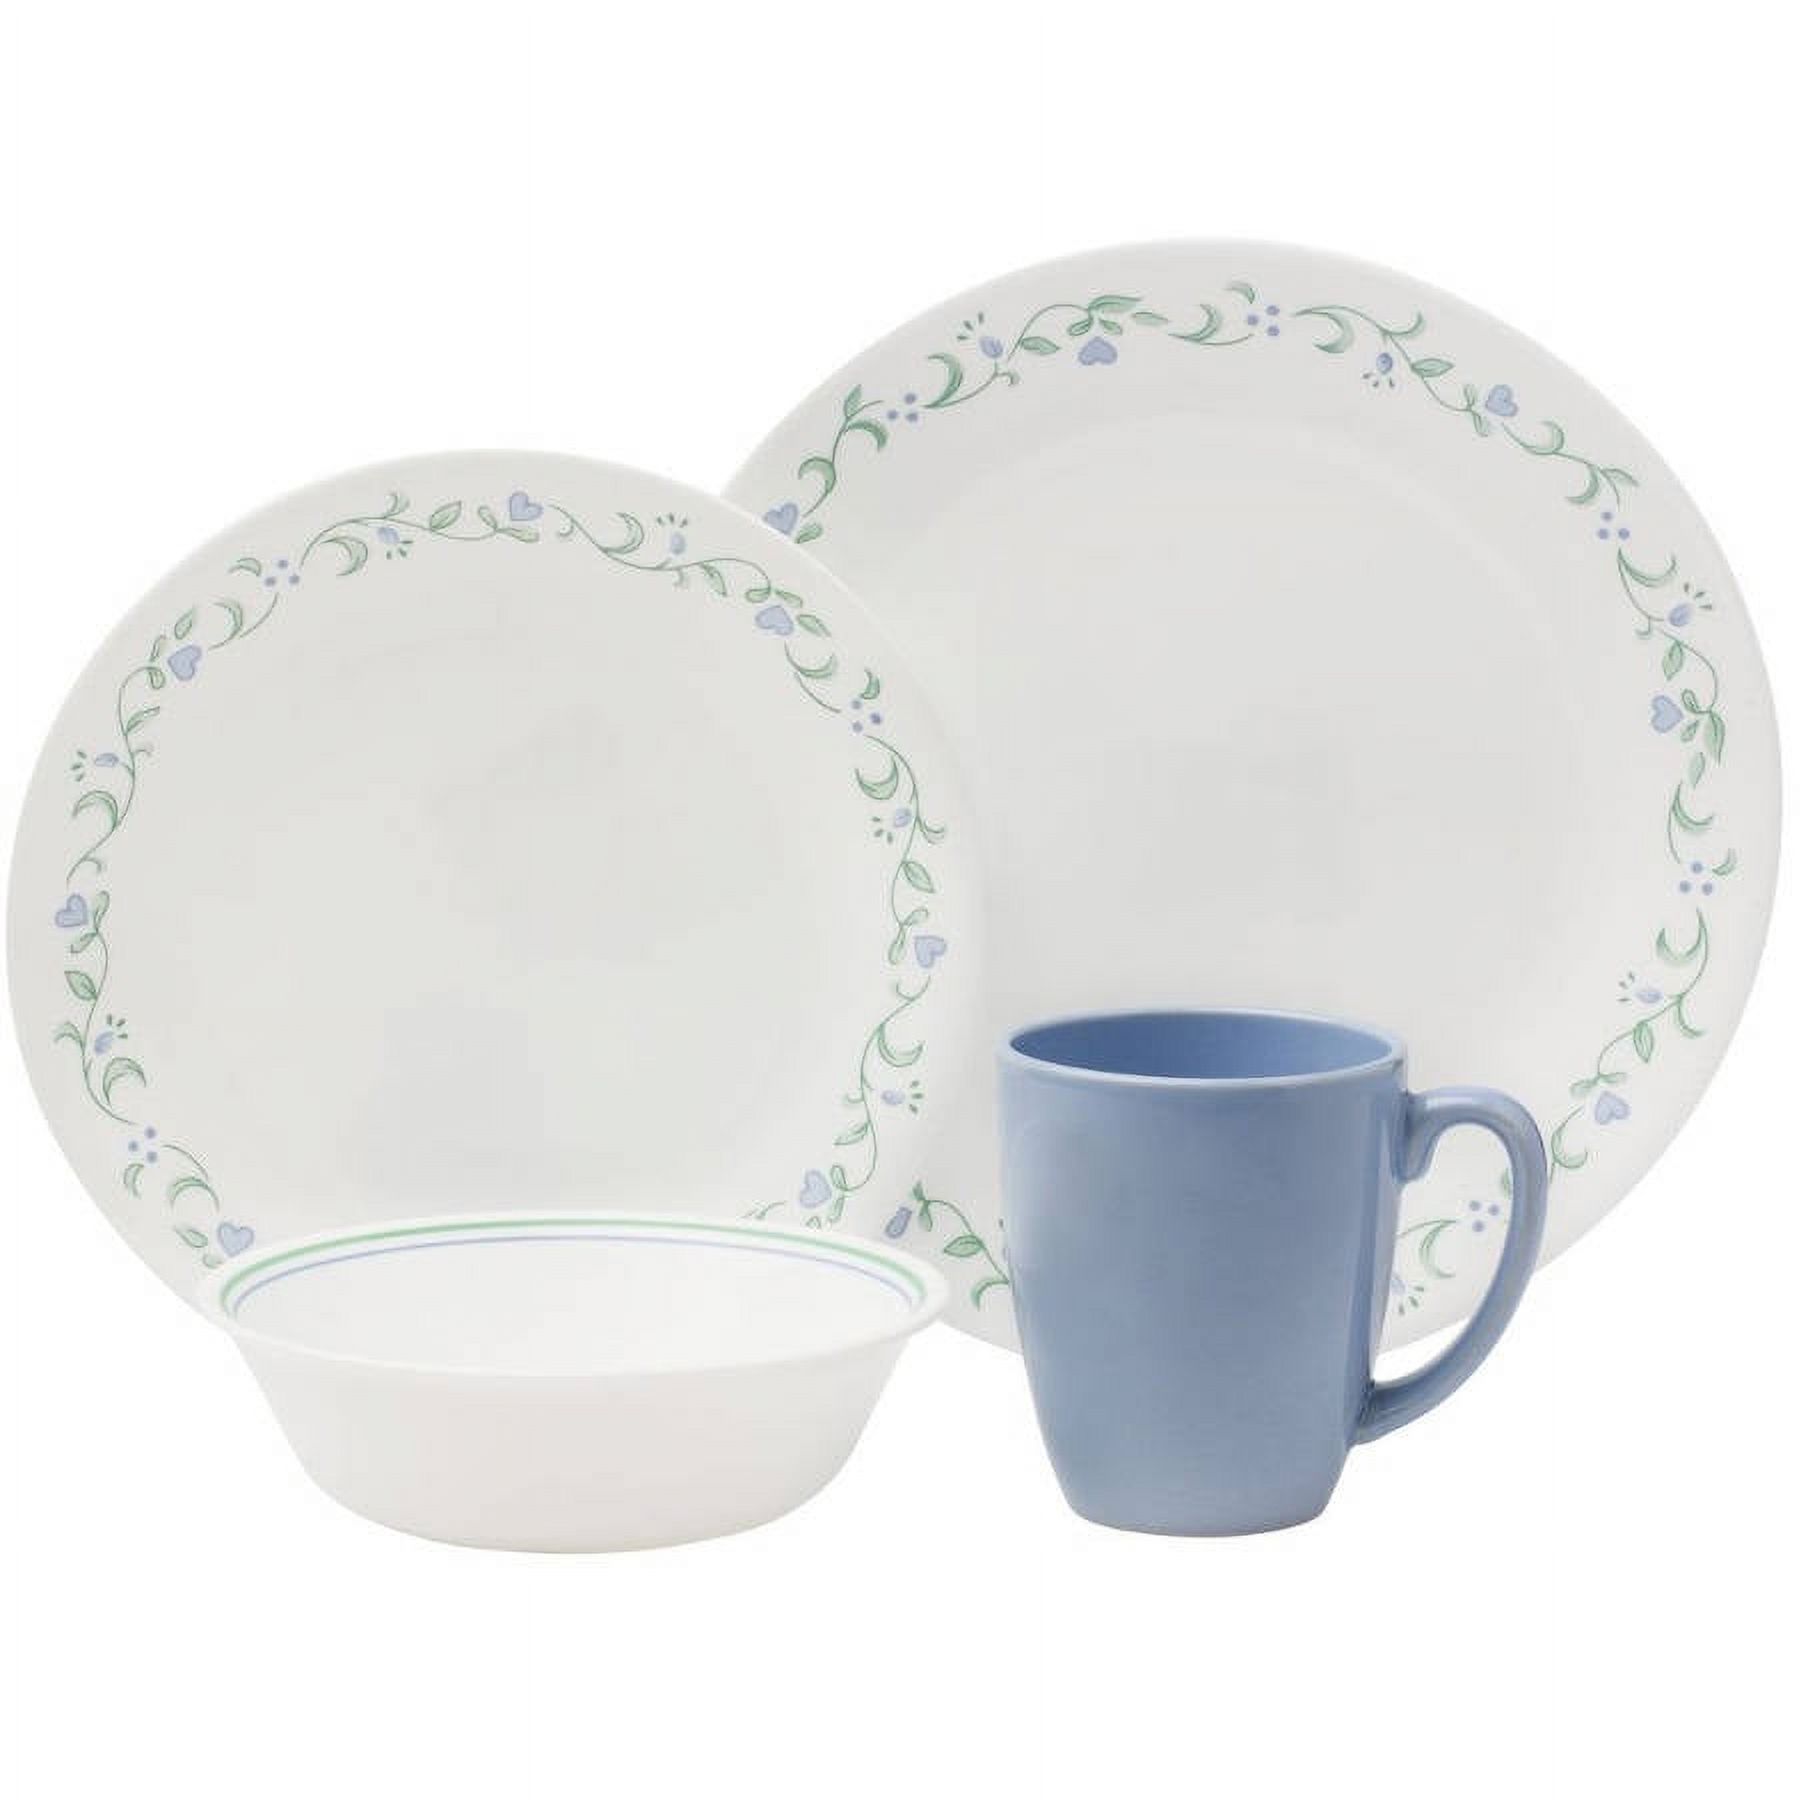 Corelle Classic Country Cottage 16-Piece Dinnerware Set, White, Blue - image 1 of 4